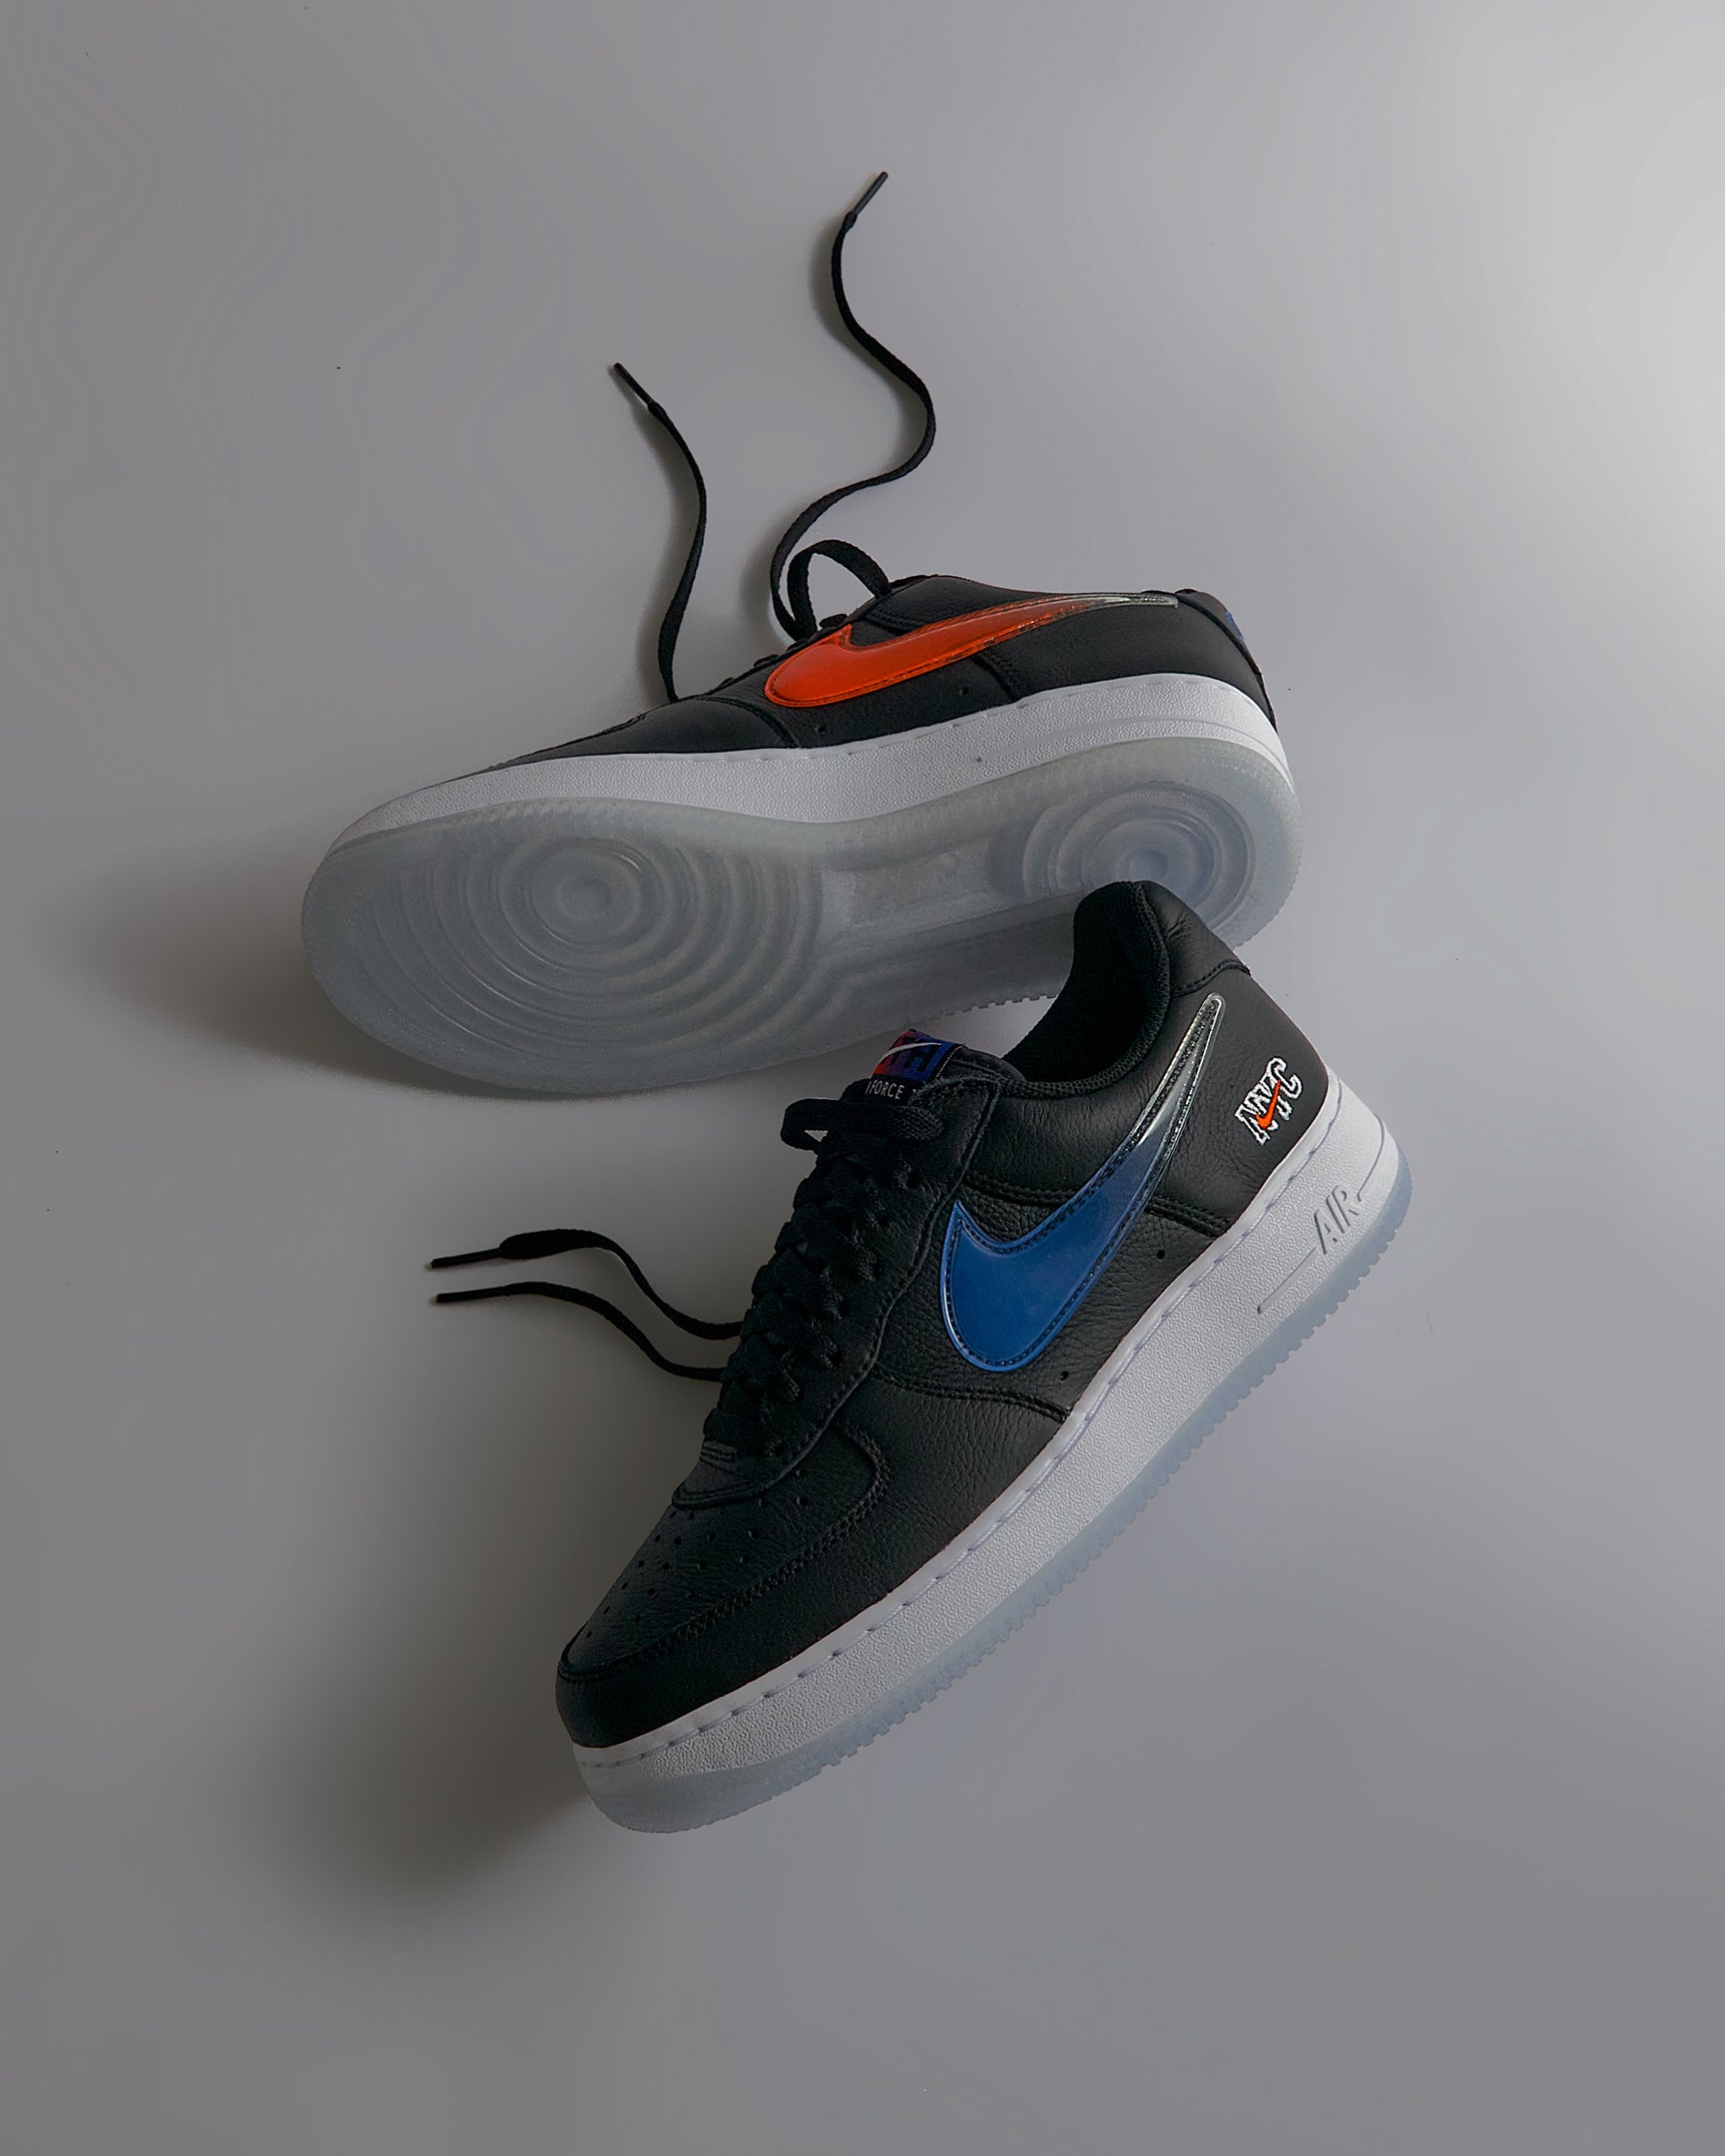 Kith for Nike Air Force 1 Low - NYC “Away” – Kith Tokyo